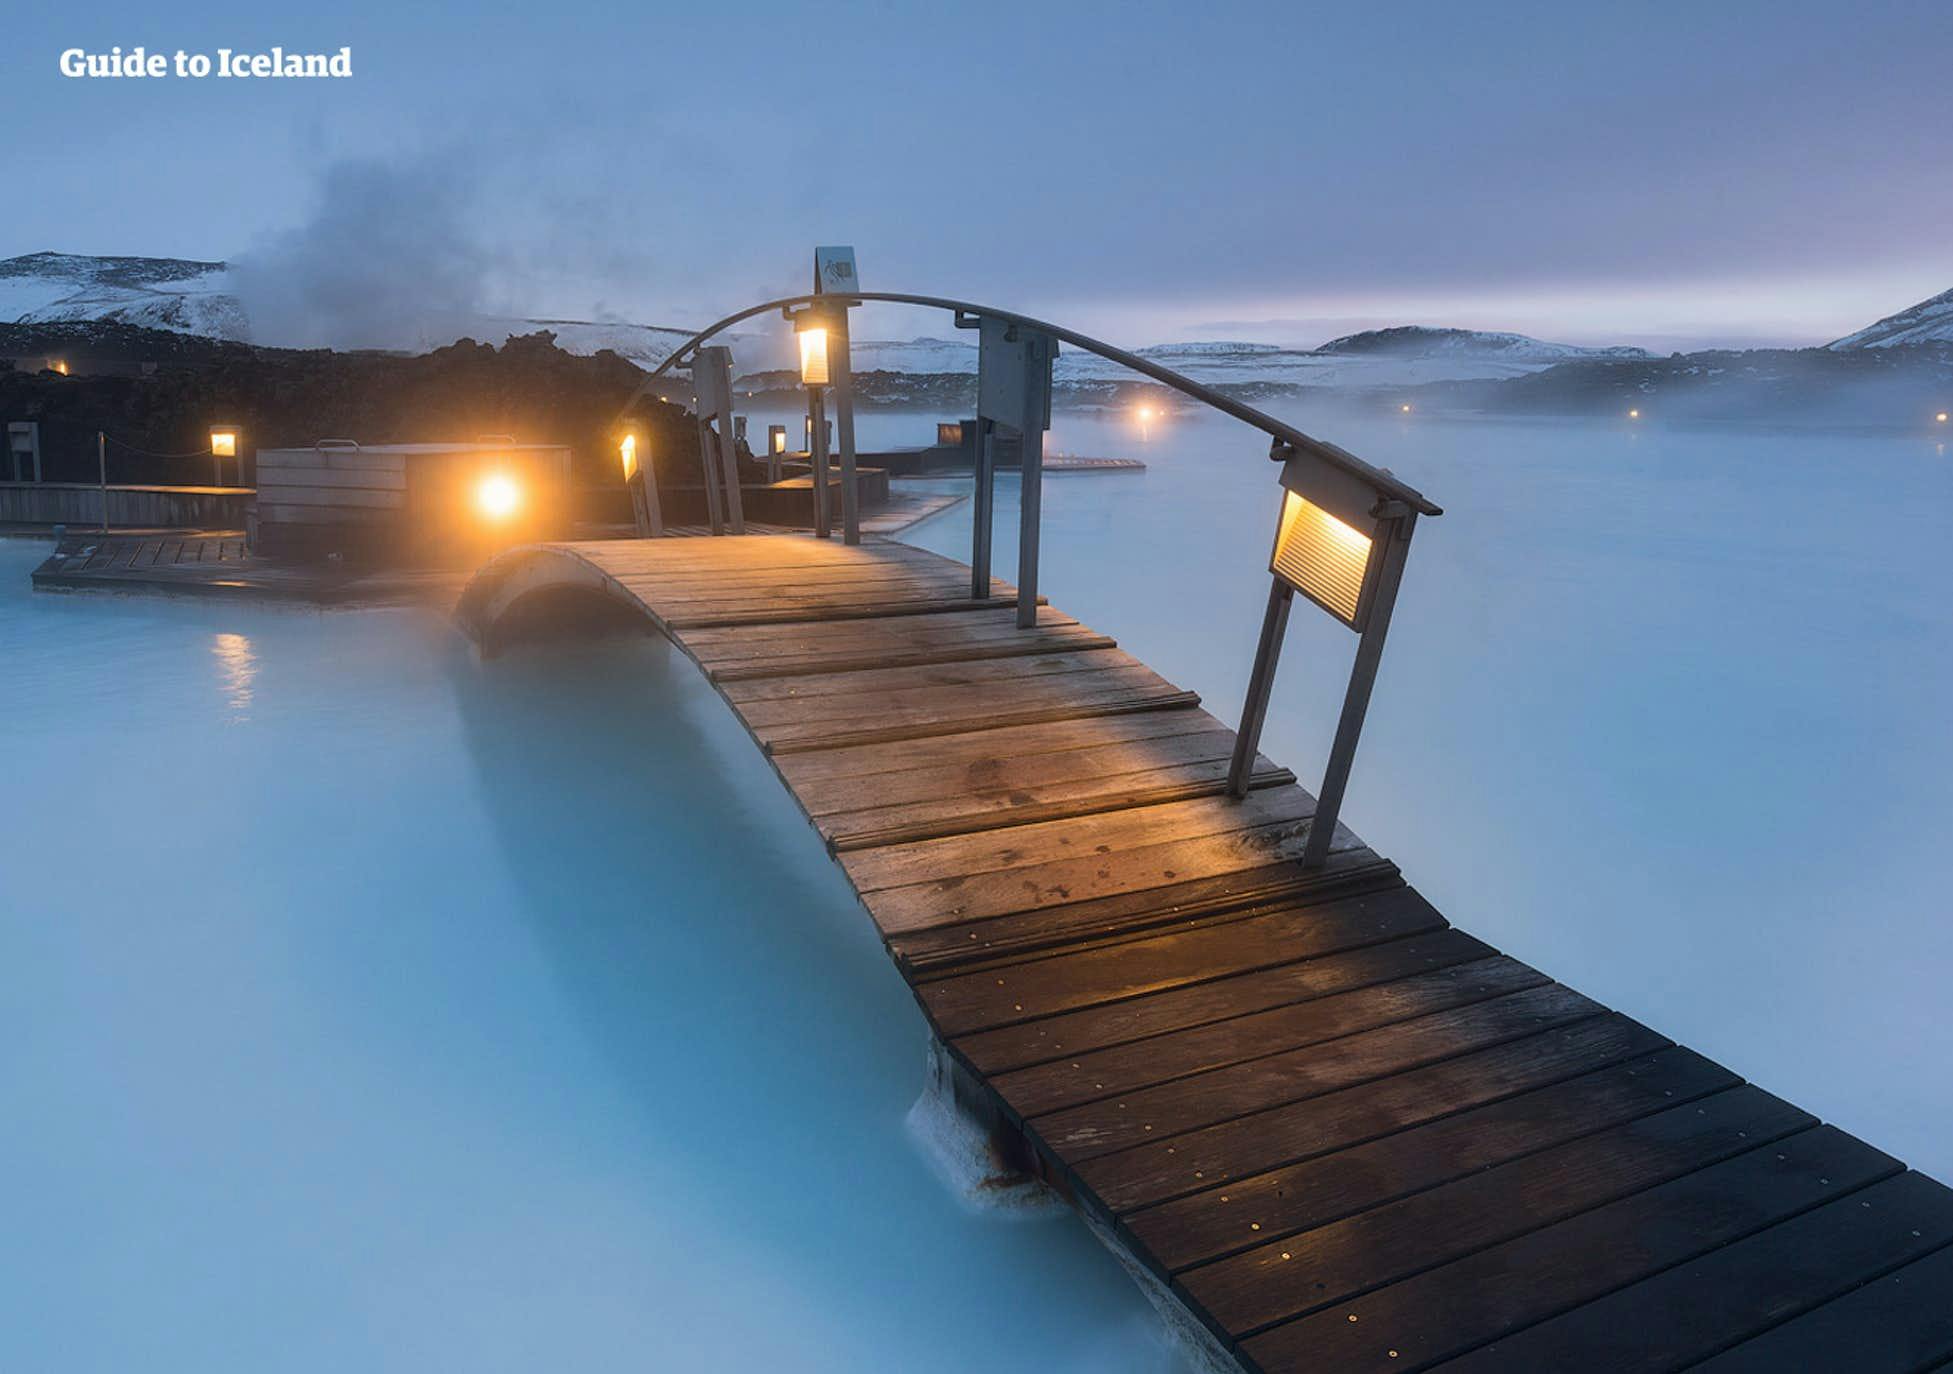 The famous Blue Lagoon Spa.